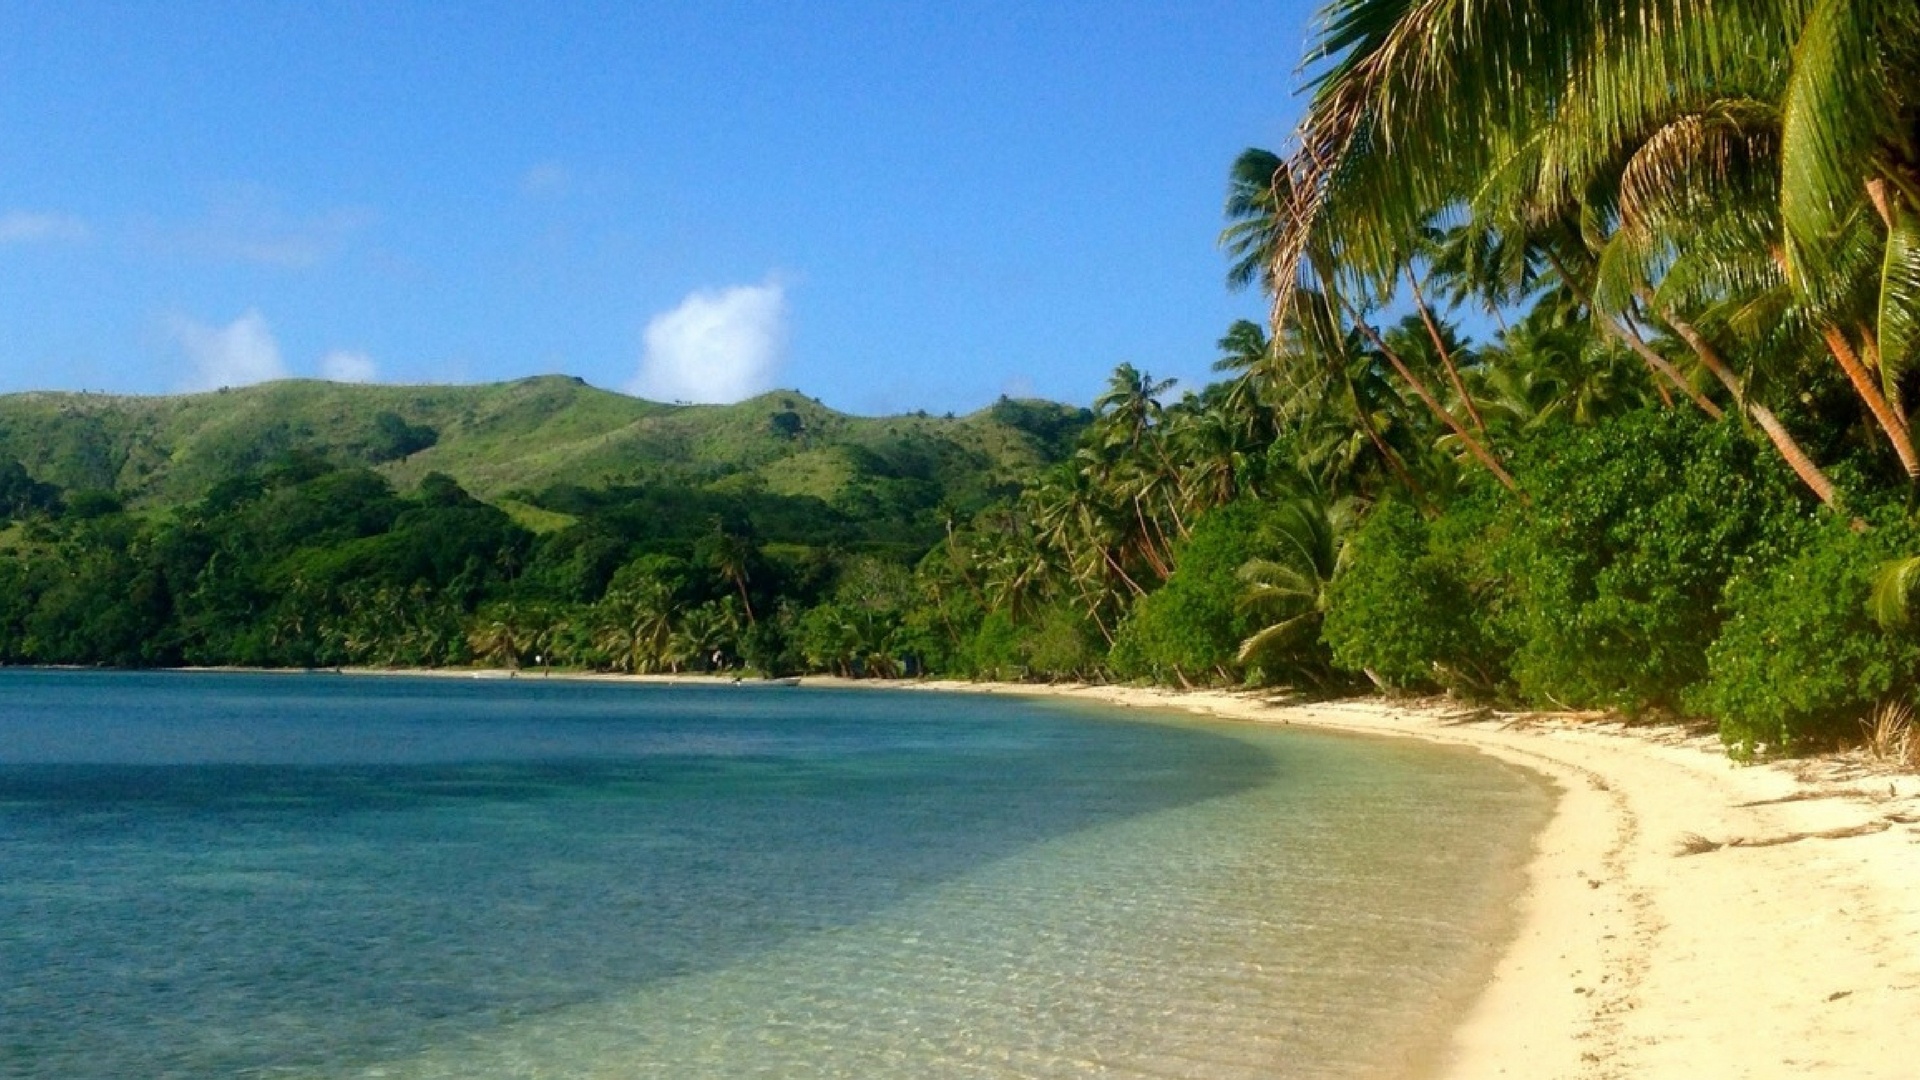 Fiji: The archipelago has a total land area of approximately 18,300 square kilometers. 1920x1080 Full HD Wallpaper.